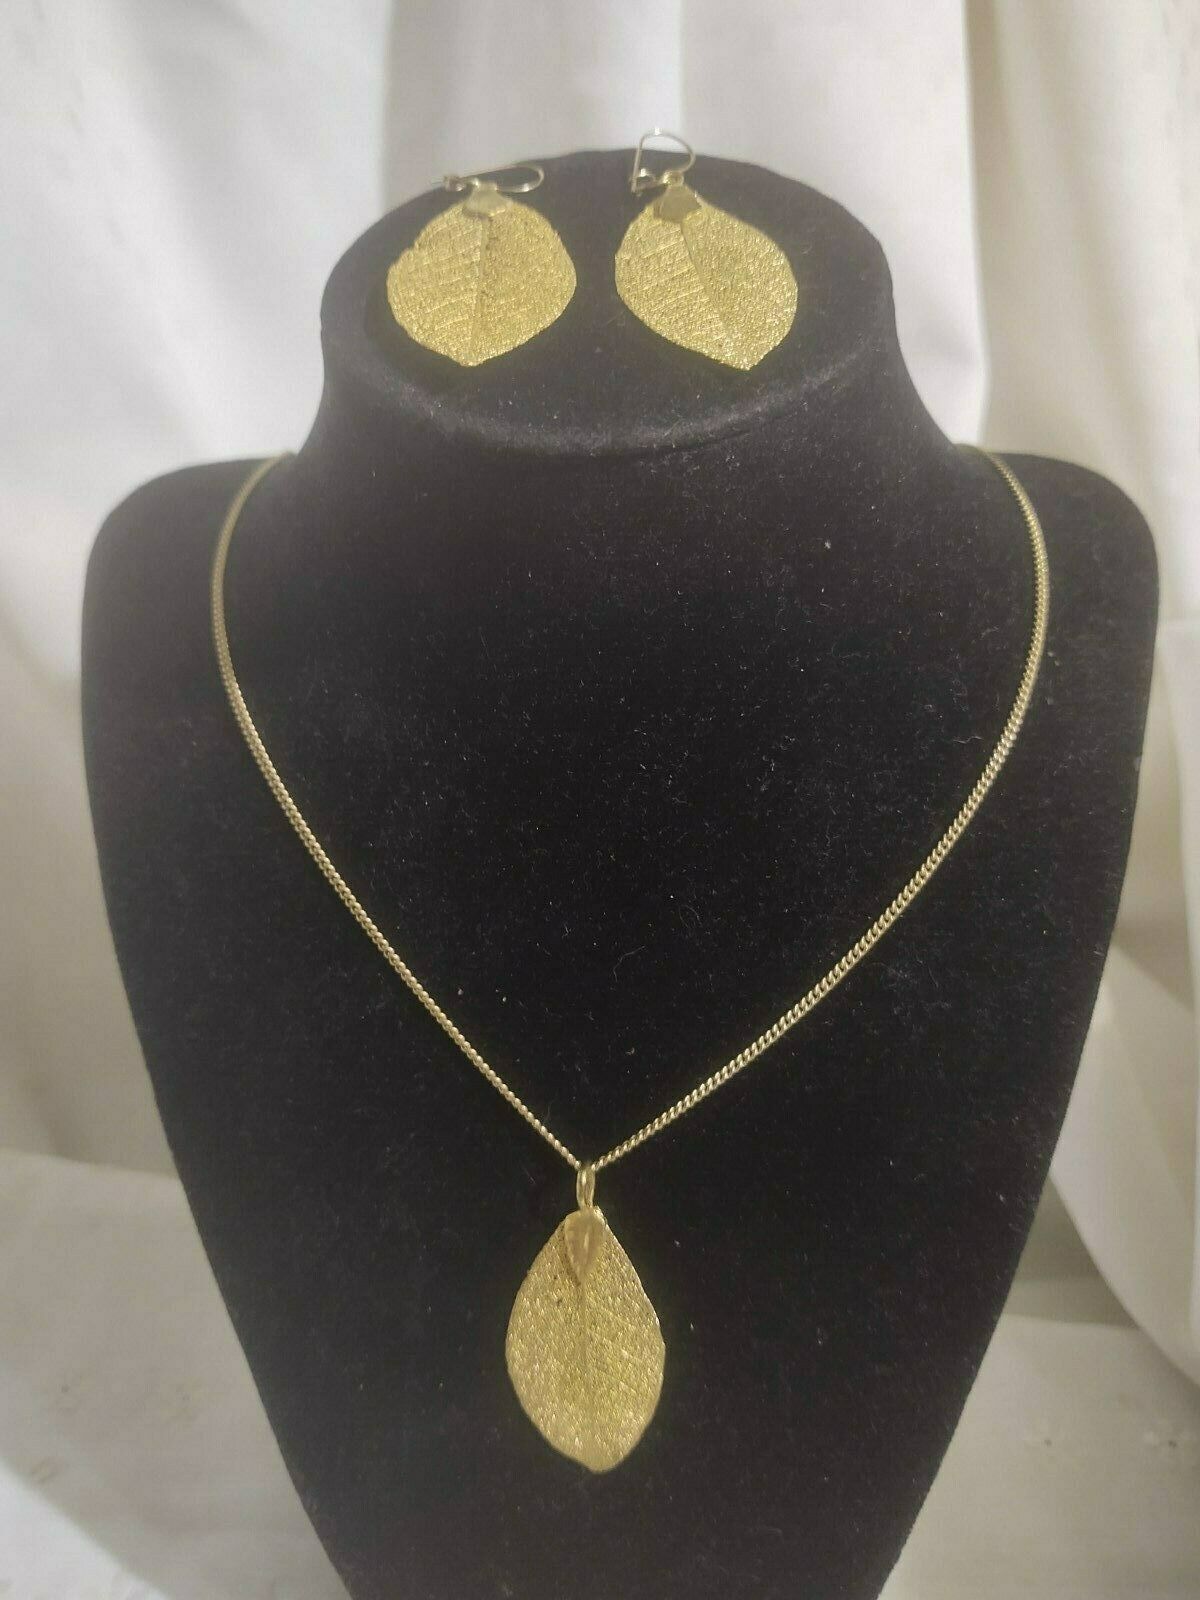 Gold Dipped Leaves Pierced Hook Earrings Necklace Leaf 24" Chain Smithsonian Vtg